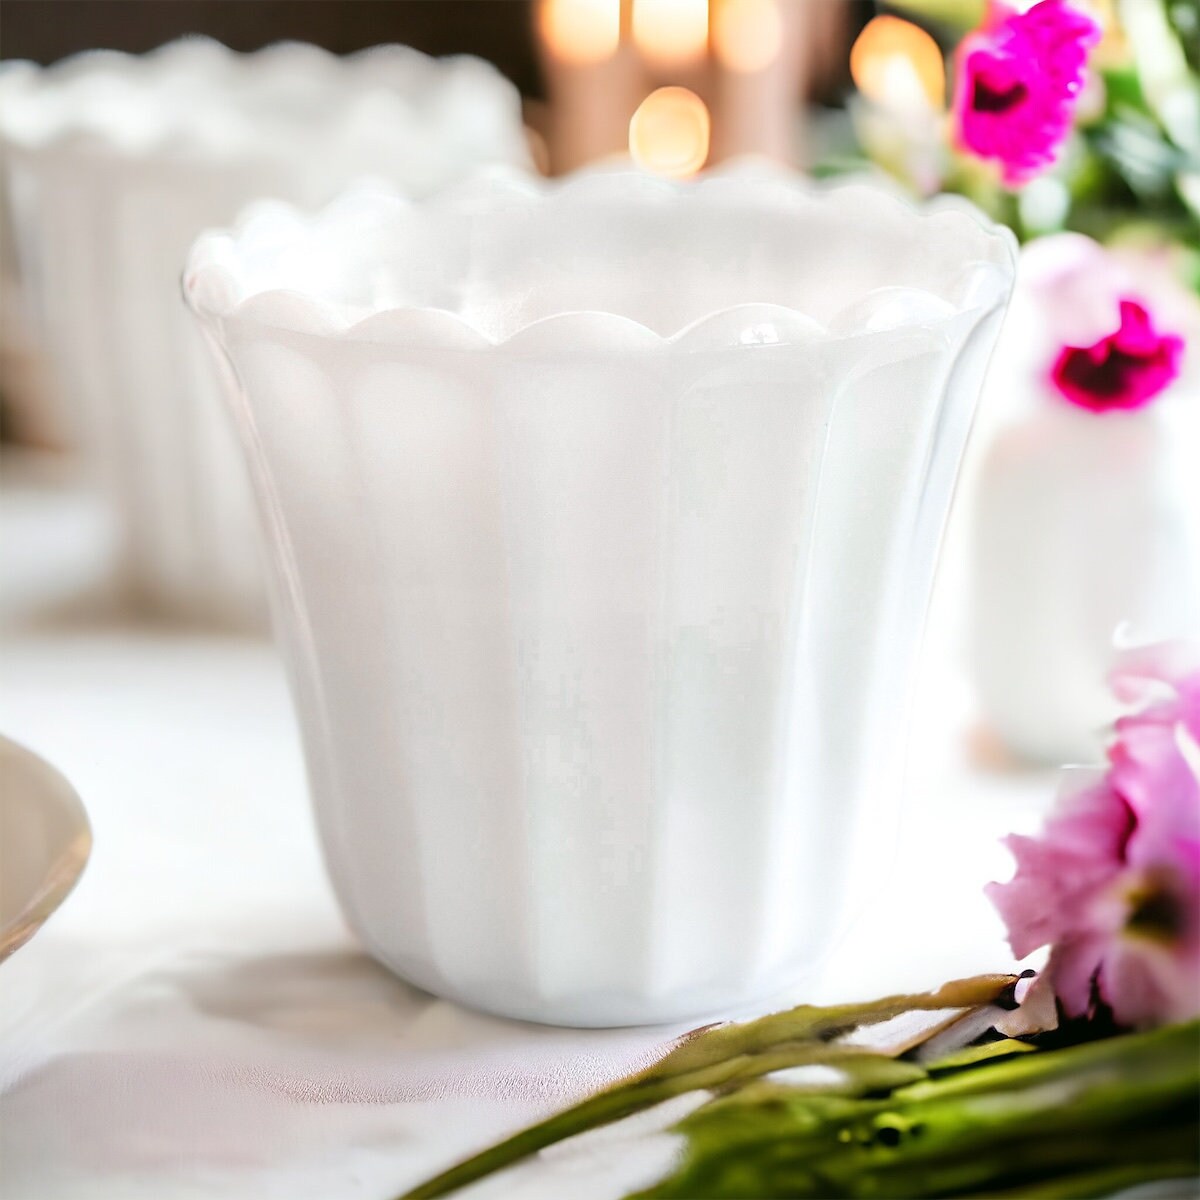 Vintage Milk Glass Candle | Choose Your Scent